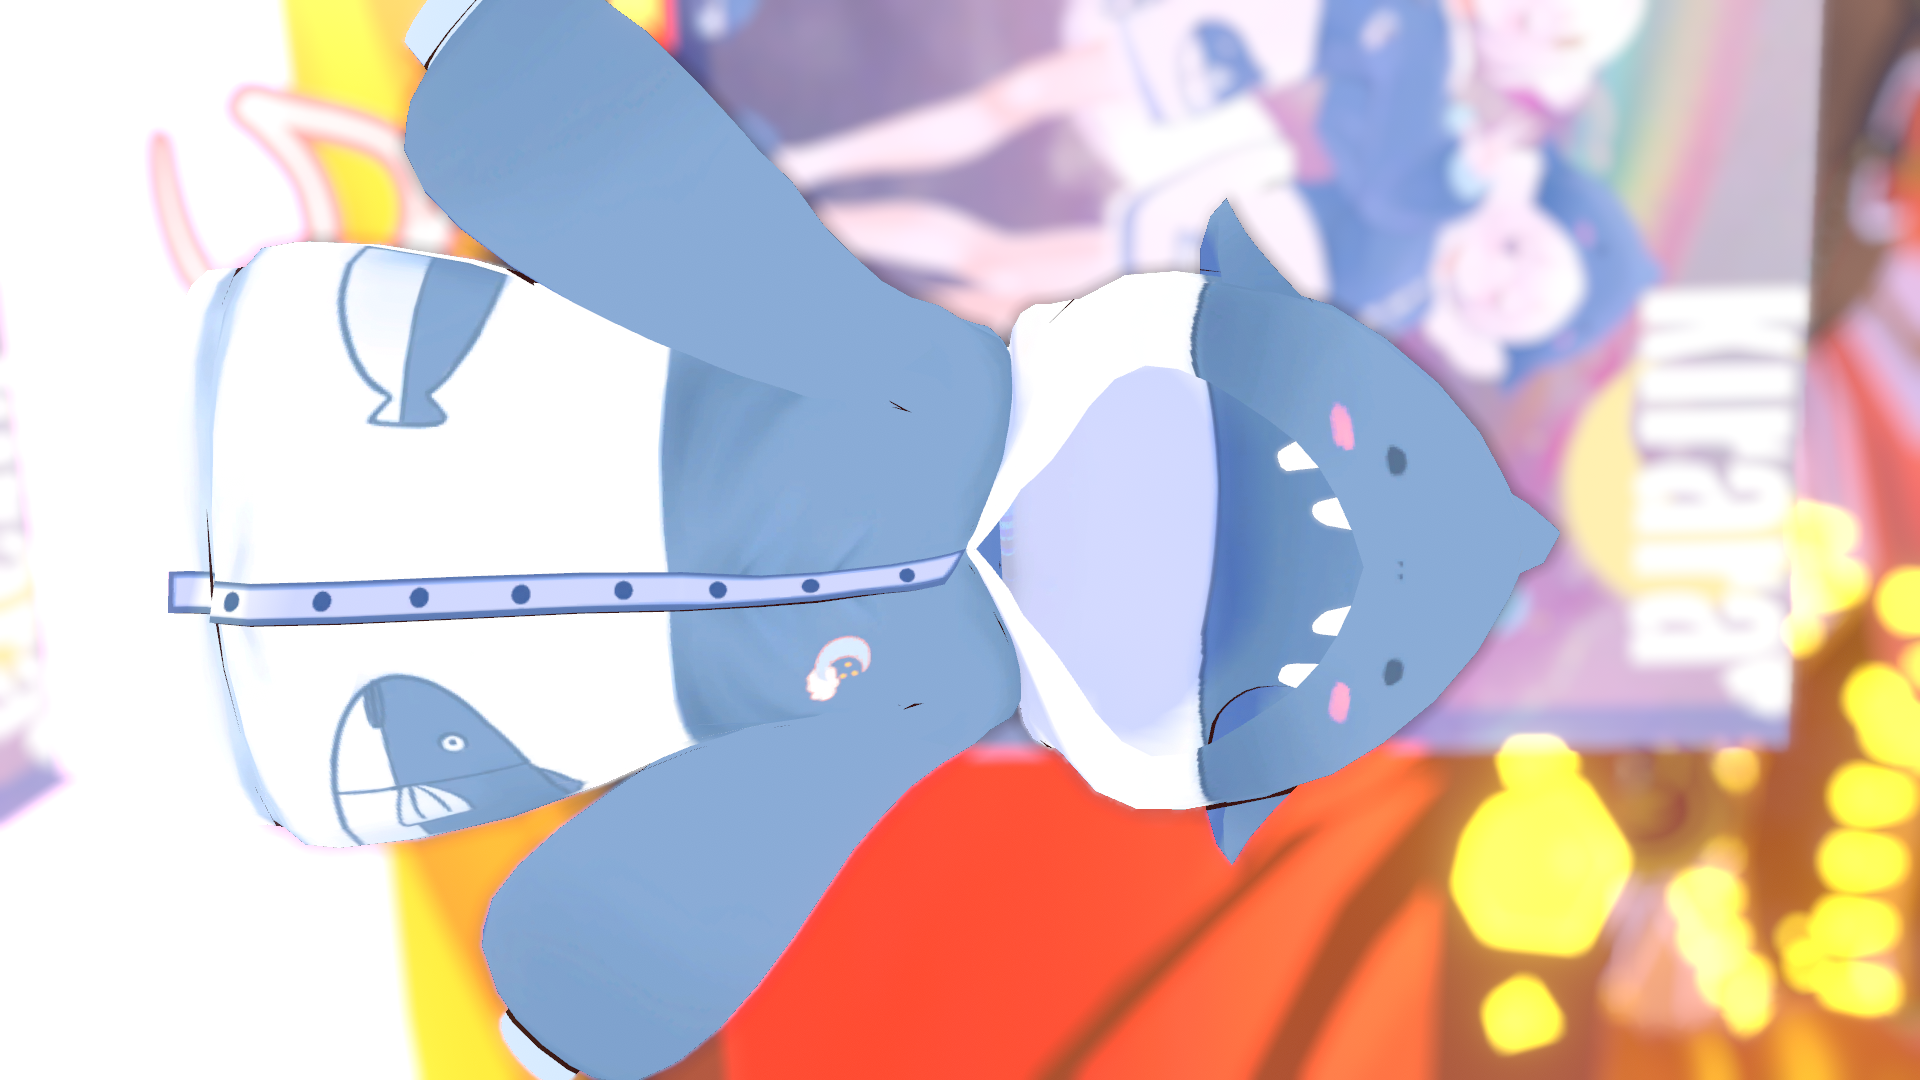 VRChat_1920x1080_2021-12-05_05-11-06.256.png